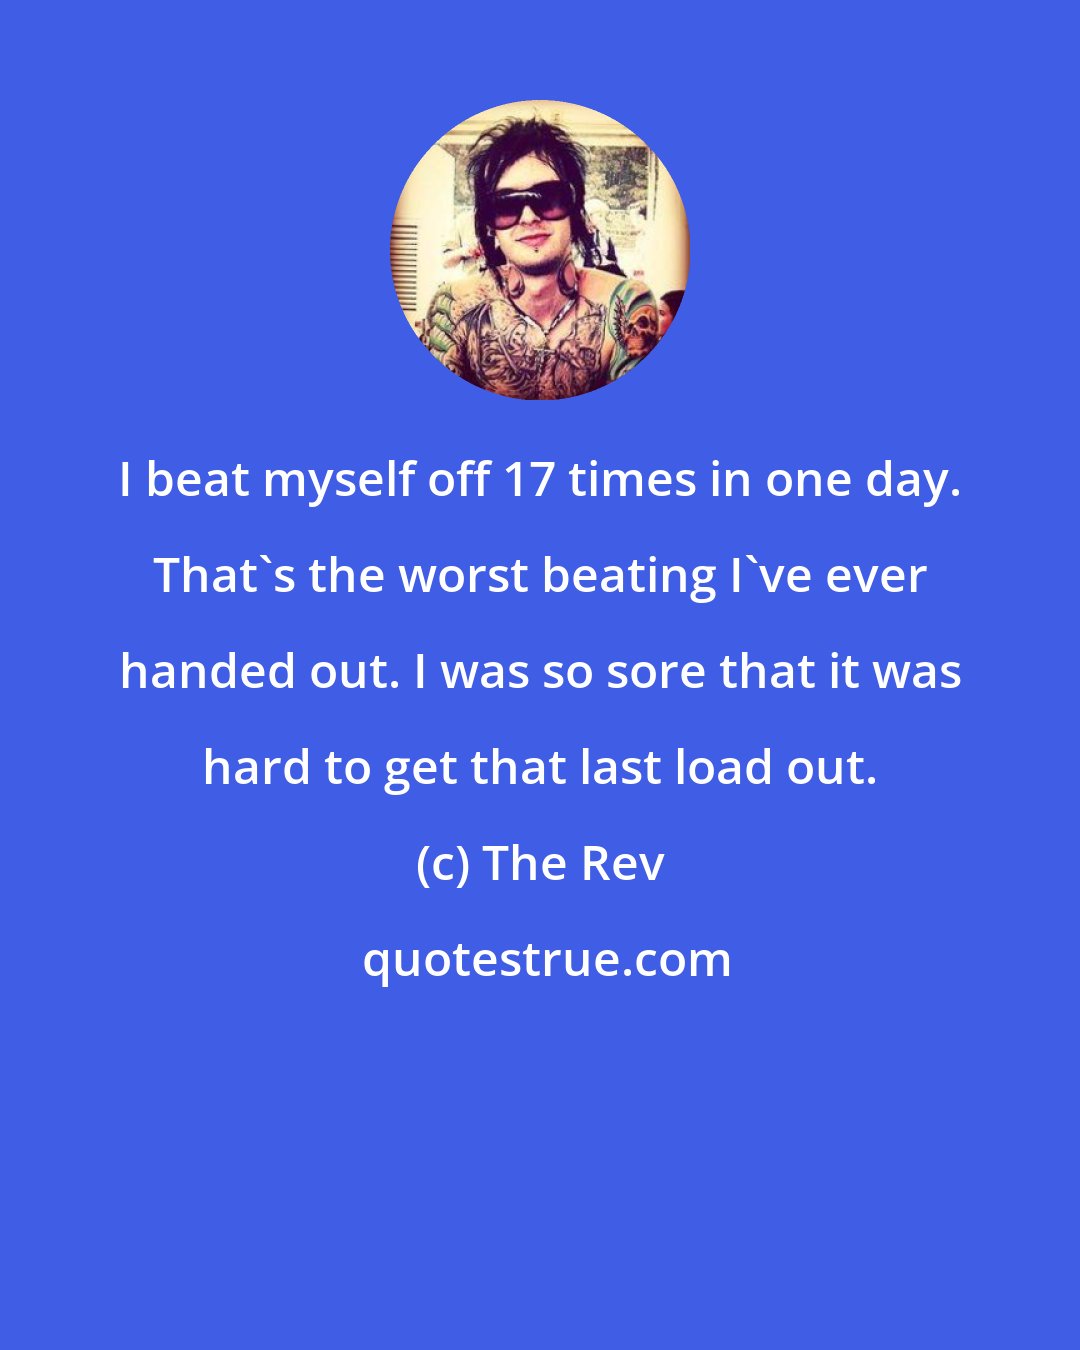 The Rev: I beat myself off 17 times in one day. That's the worst beating I've ever handed out. I was so sore that it was hard to get that last load out.